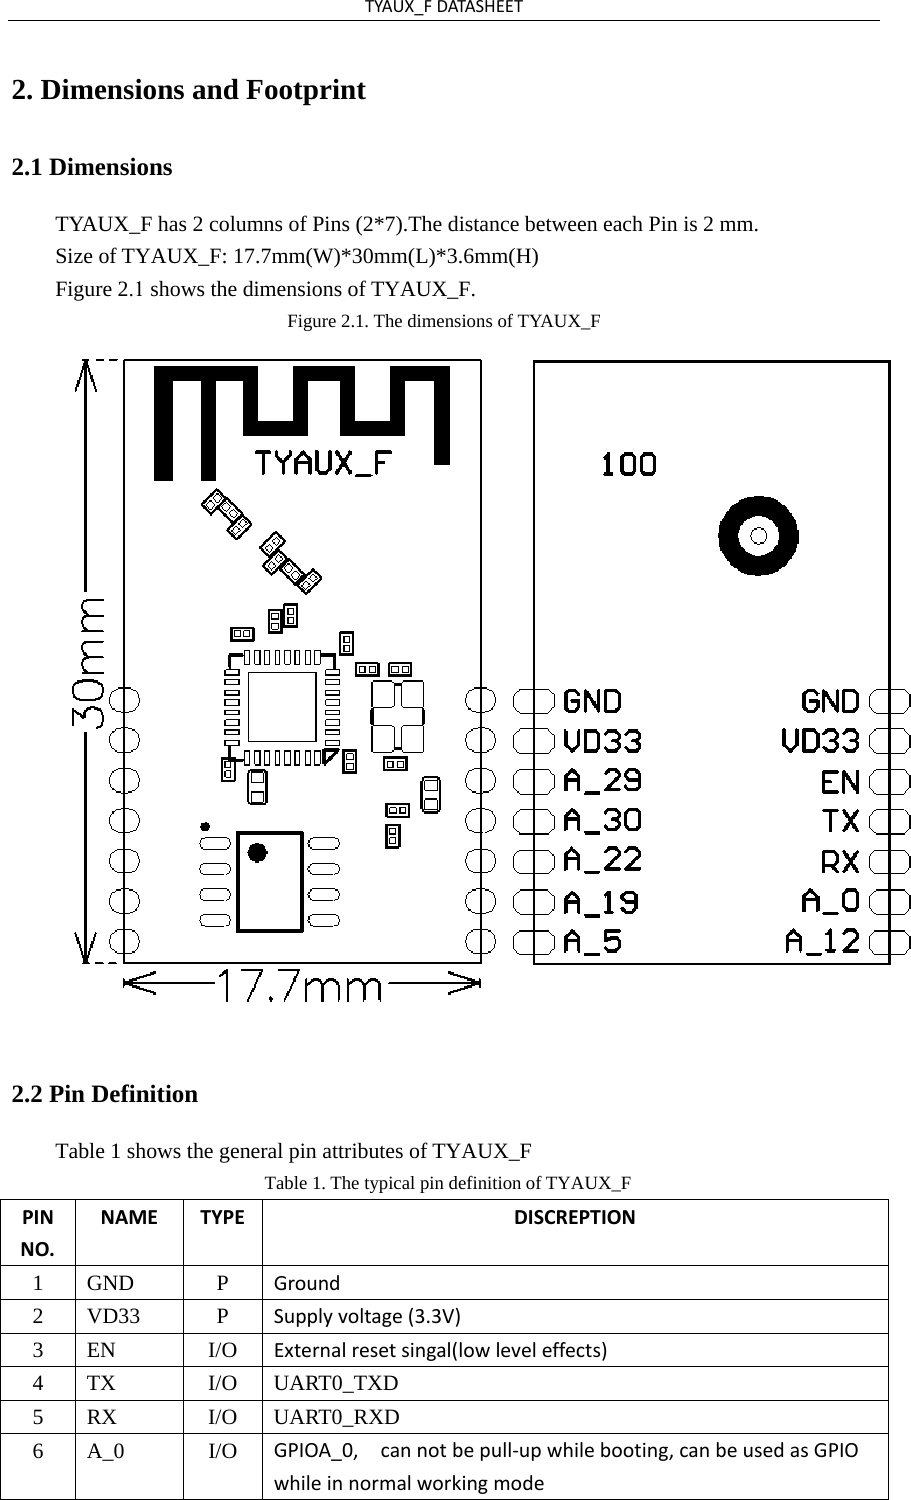 TYAUX_FDATASHEET2. Dimensions and Footprint2.1 Dimensions TYAUX_F has 2 columns of Pins (2*7).The distance between each Pin is 2 mm. Size of TYAUX_F: 17.7mm(W)*30mm(L)*3.6mm(H) Figure 2.1 shows the dimensions of TYAUX_F. Figure 2.1. The dimensions of TYAUX_F 2.2 Pin Definition Table 1 shows the general pin attributes of TYAUX_F Table 1. The typical pin definition of TYAUX_F PINNO.NAMETYPEDISCREPTION1 GND  P Ground 2 VD33  P Supplyvoltage(3.3V) 3 EN  I/O Externalresetsingal(lowleveleffects) 4 TX  I/O UART0_TXD 5 RX  I/O UART0_RXD 6 A_0  I/O GPIOA_0,cannotbepull‐upwhilebooting,canbeusedasGPIOwhileinnormalworkingmode 